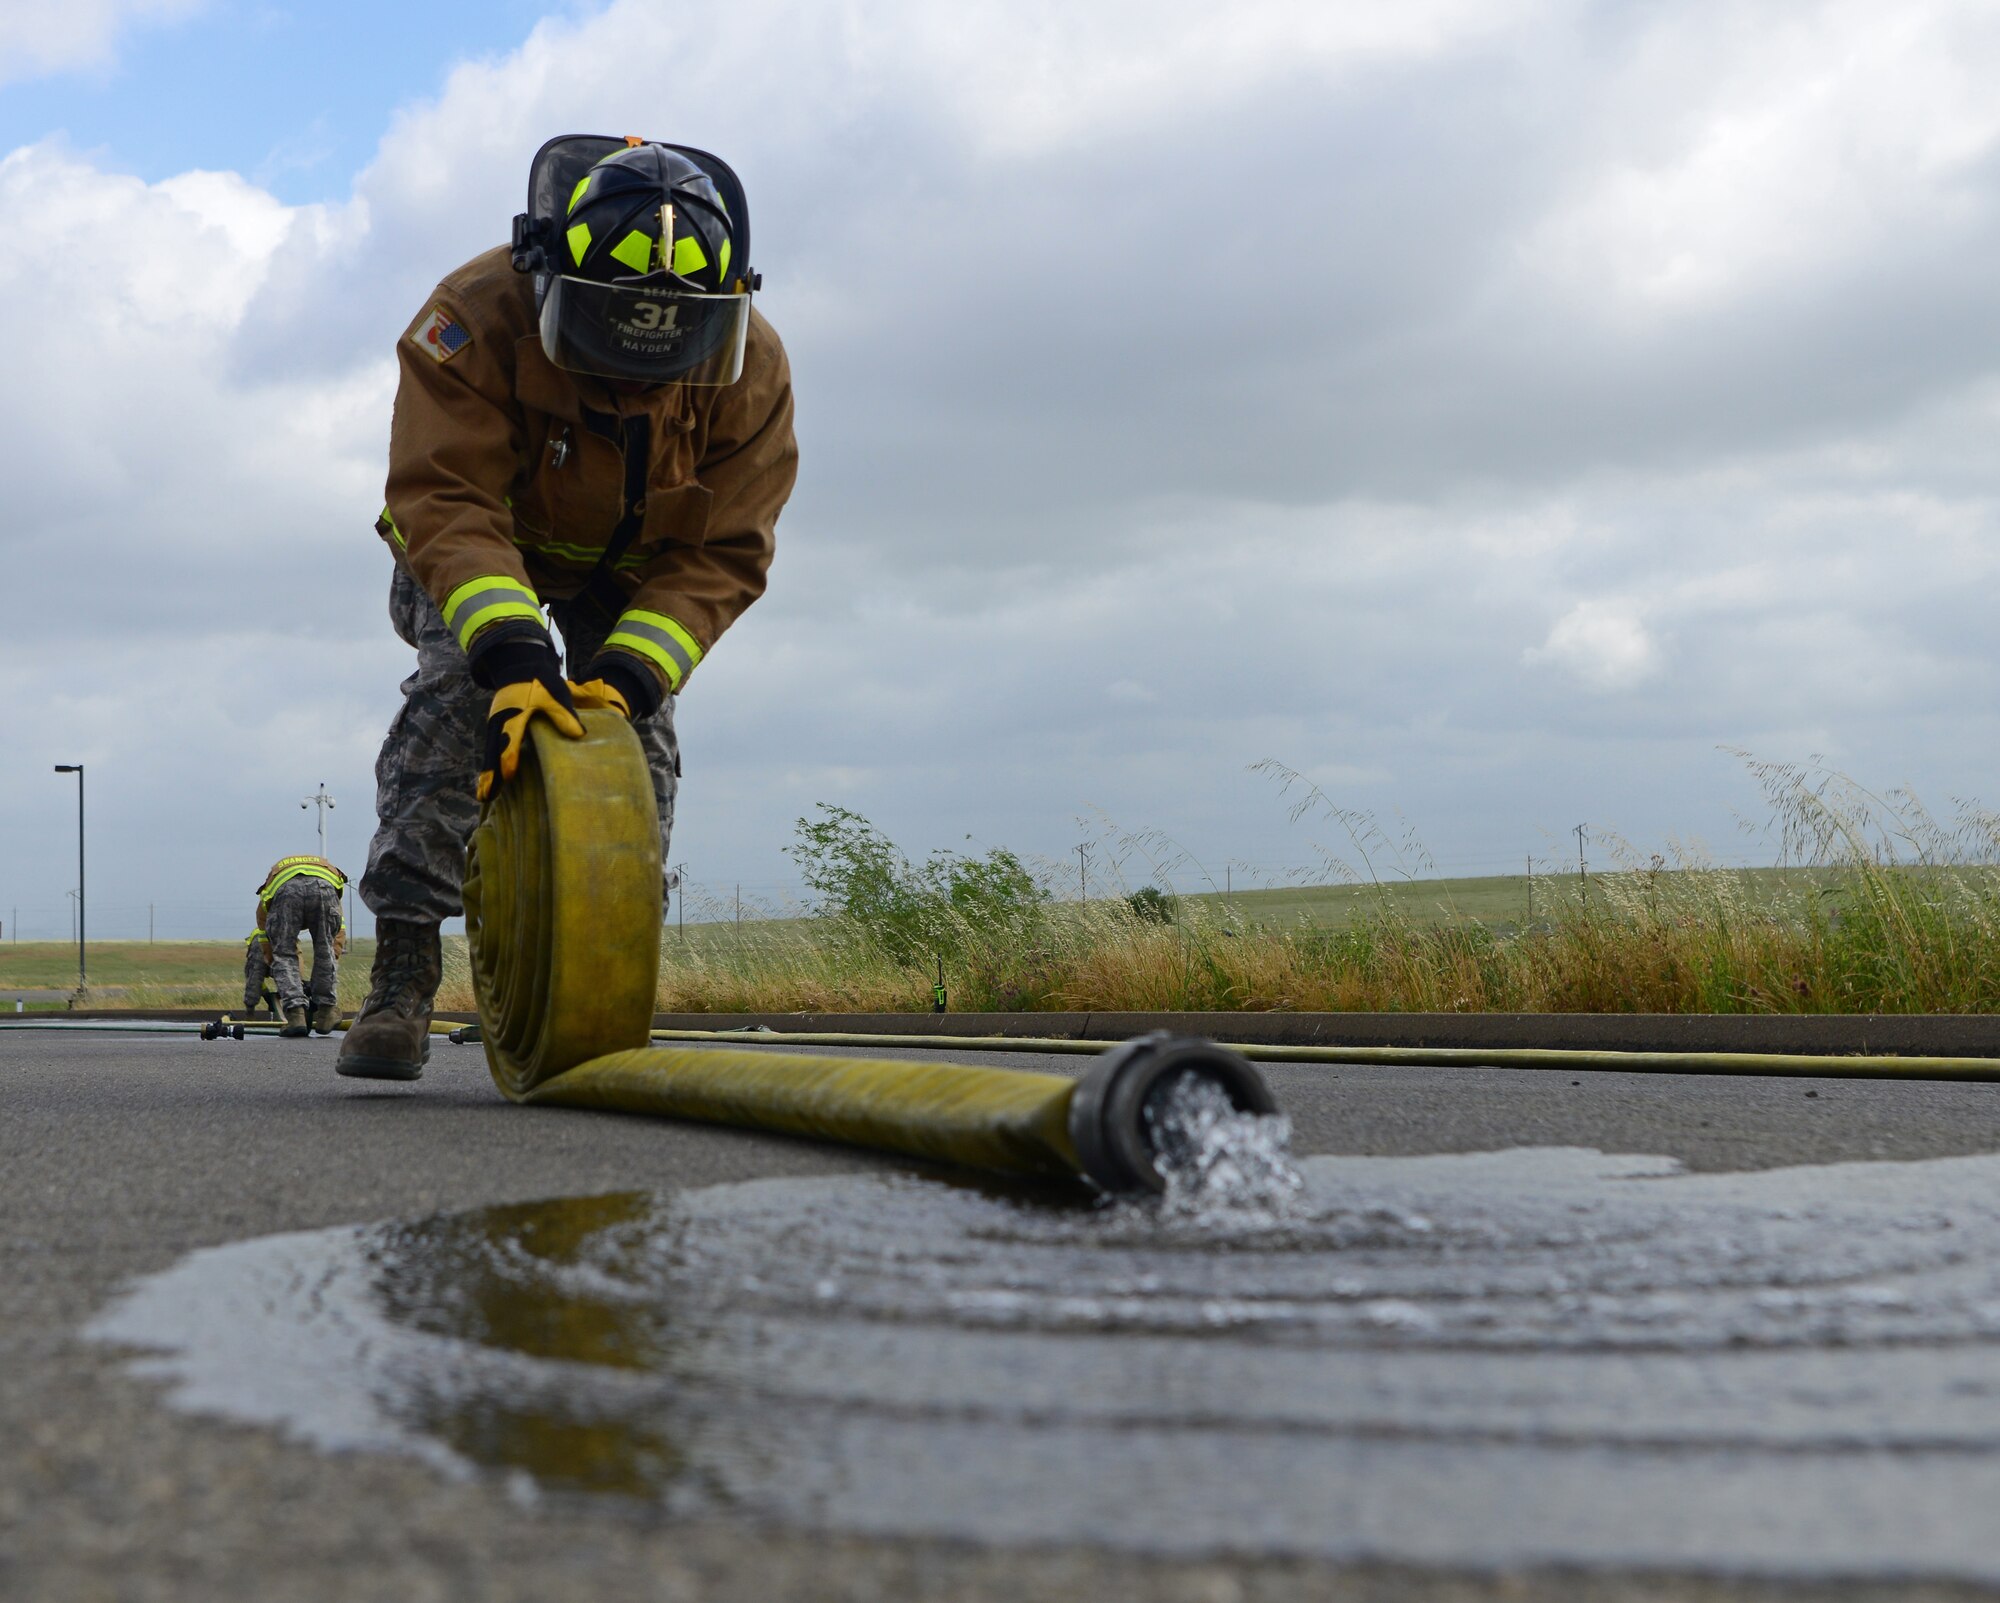 9th CES fire fighters test, certify fire hoses